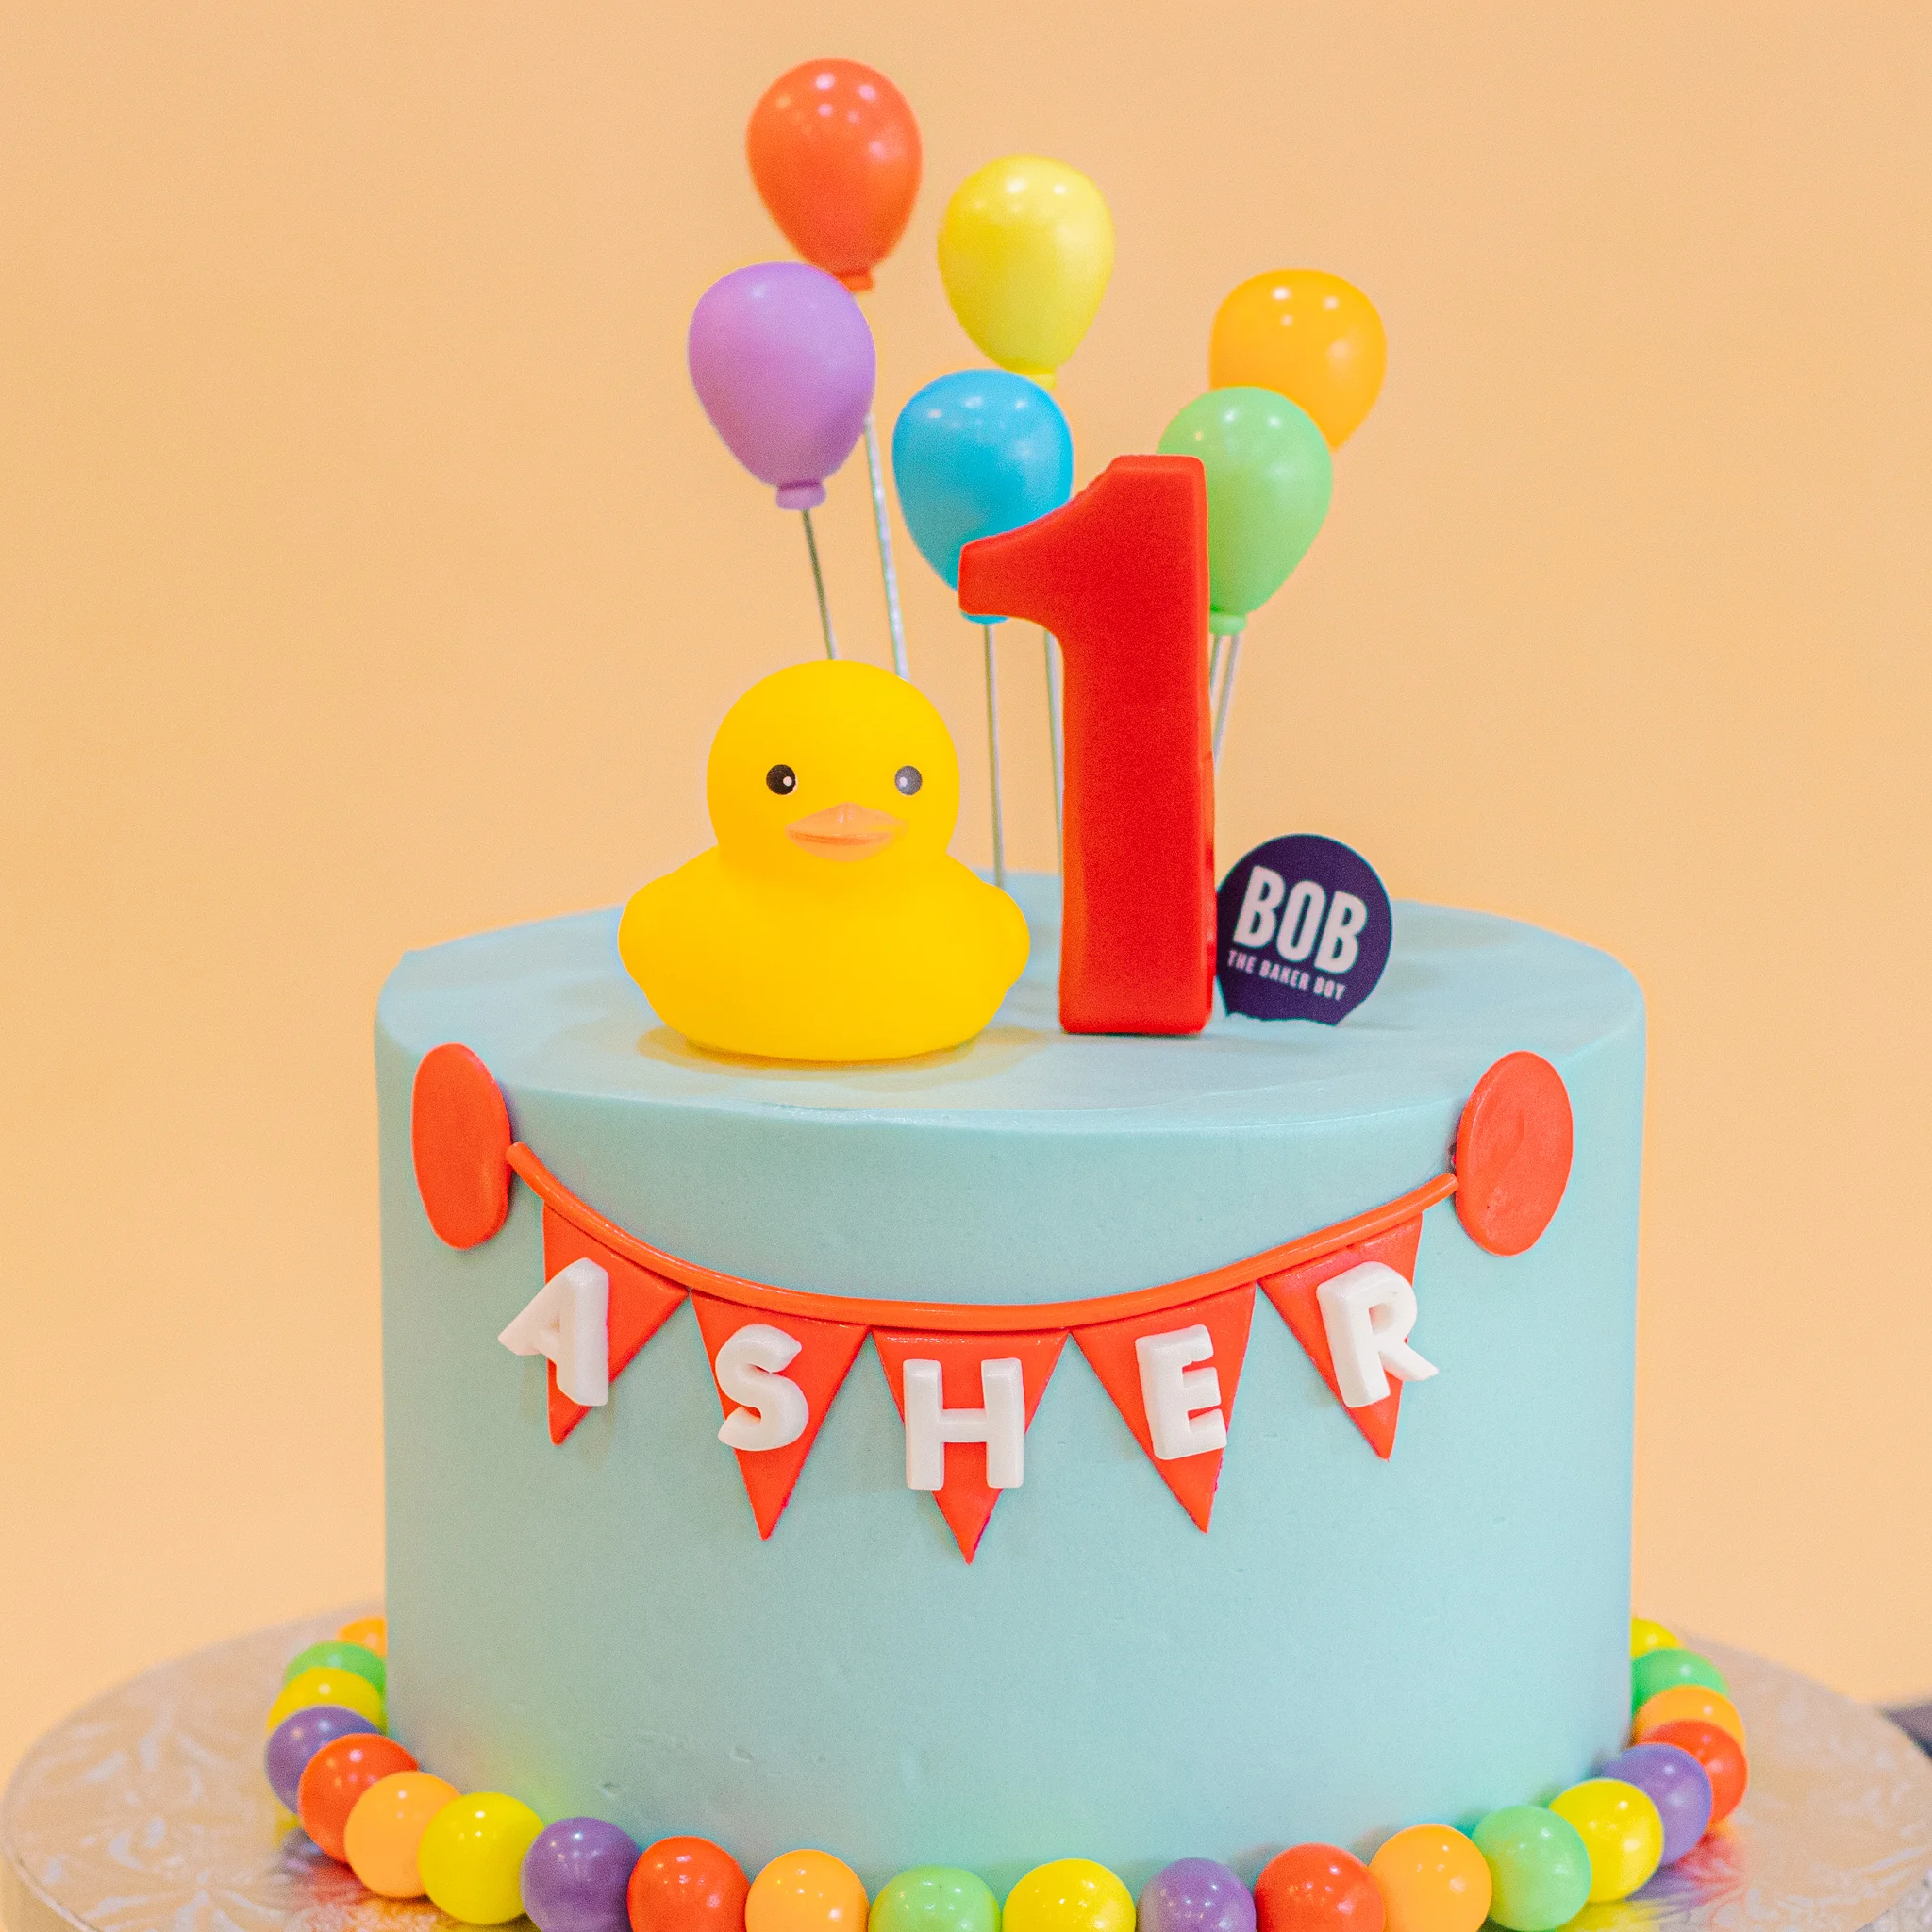 How to make a rubber ducky birthday cake - video Dailymotion